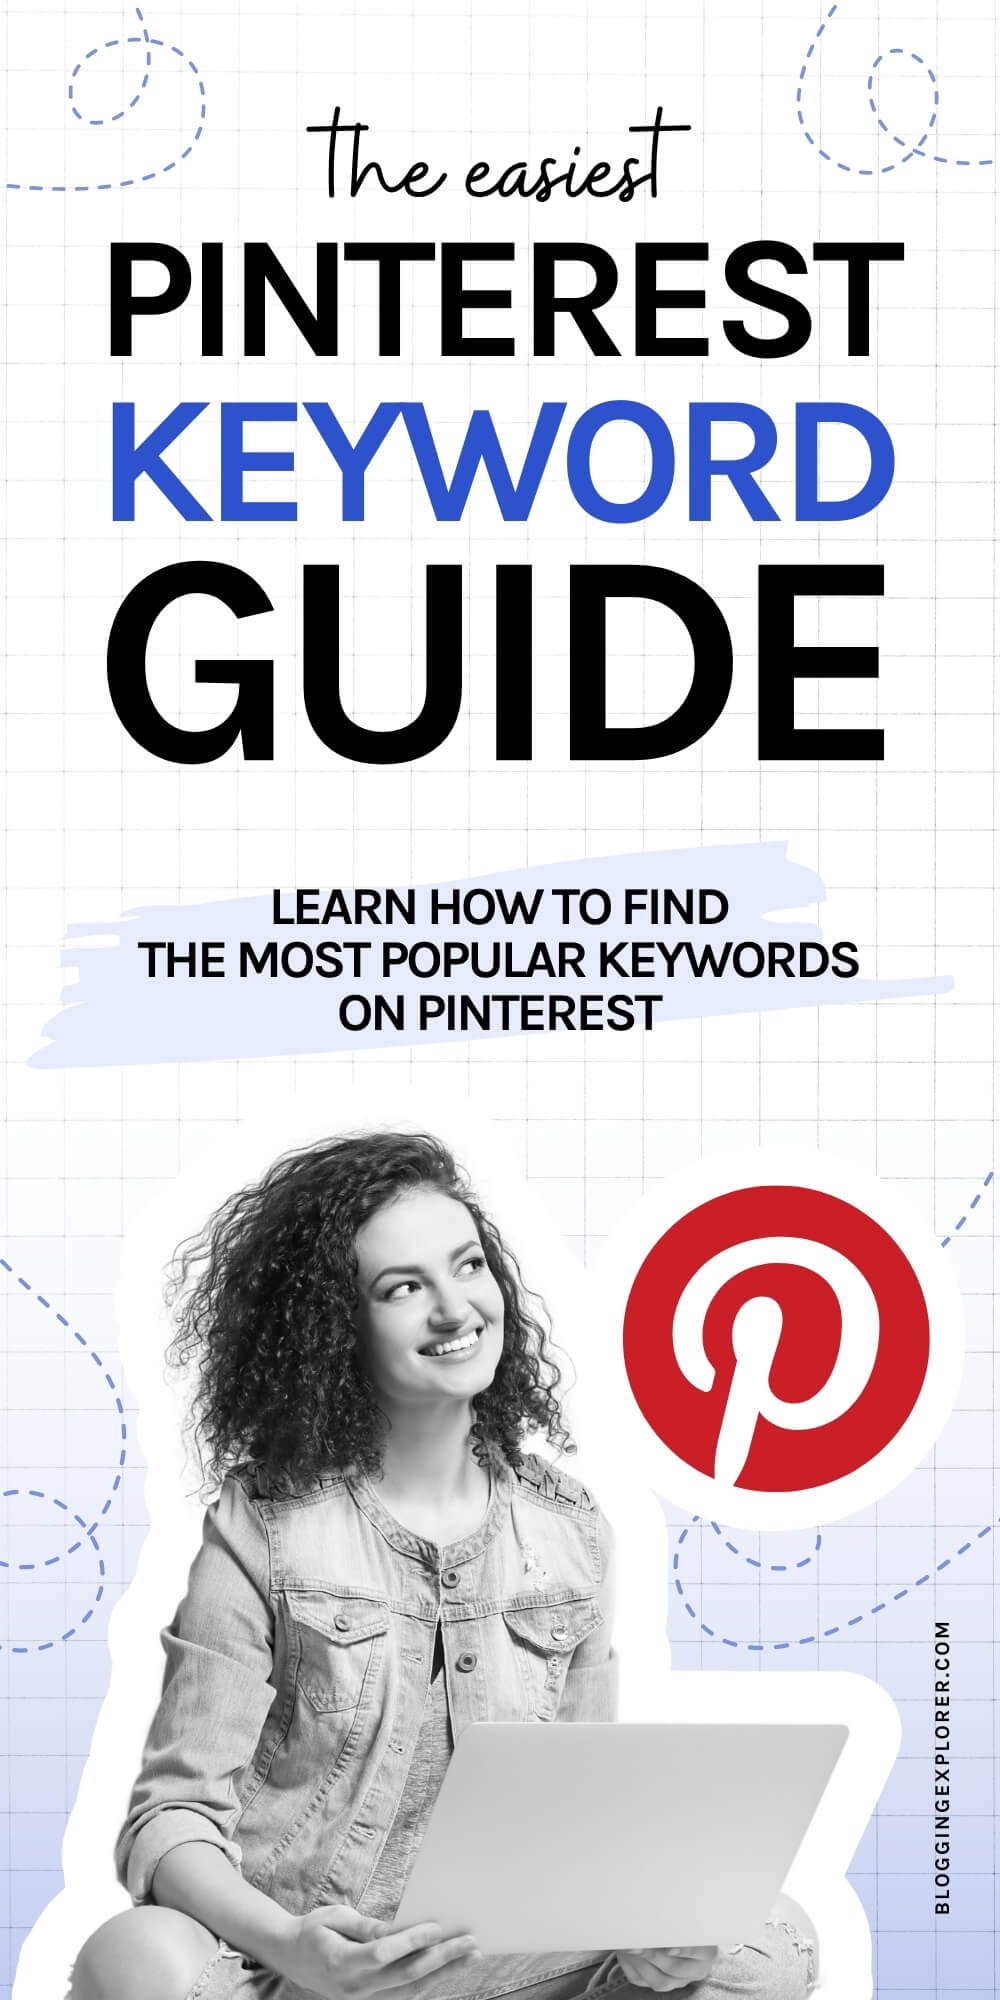 The easiest Pinterest keyword guide – Learn how to find the most popular keywords on Pinterest